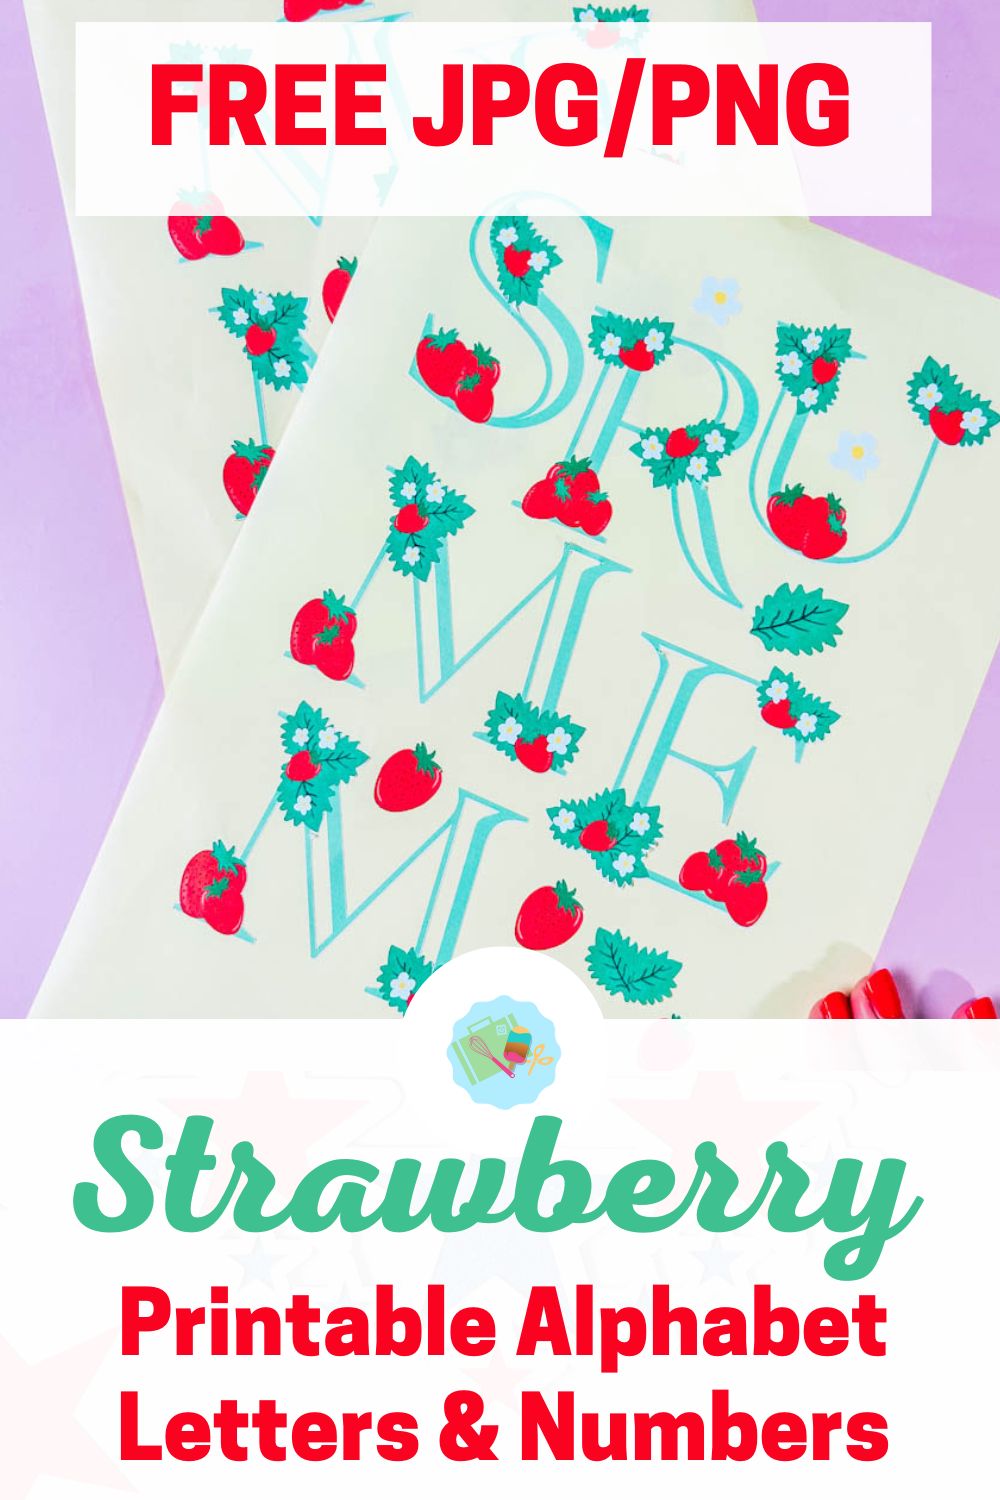 Free printable Strawberry Alphabet Letters and Number for Print and cut projects with Cricut and Silhouette